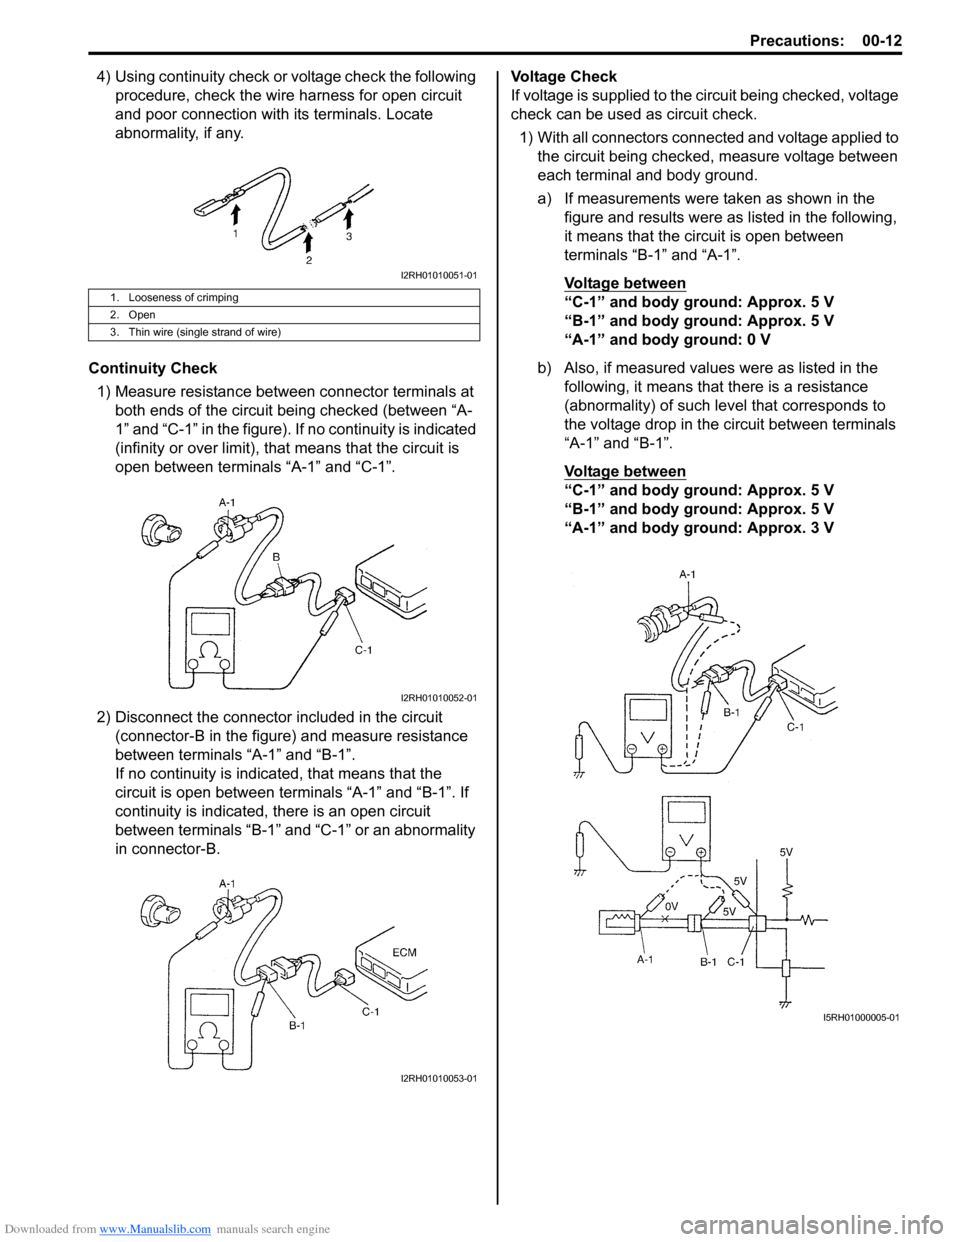 SUZUKI SWIFT 2008 2.G Service Workshop Manual Downloaded from www.Manualslib.com manuals search engine Precautions: 00-12
4) Using continuity check or voltage check the following procedure, check the wire harness for open circuit 
and poor connec